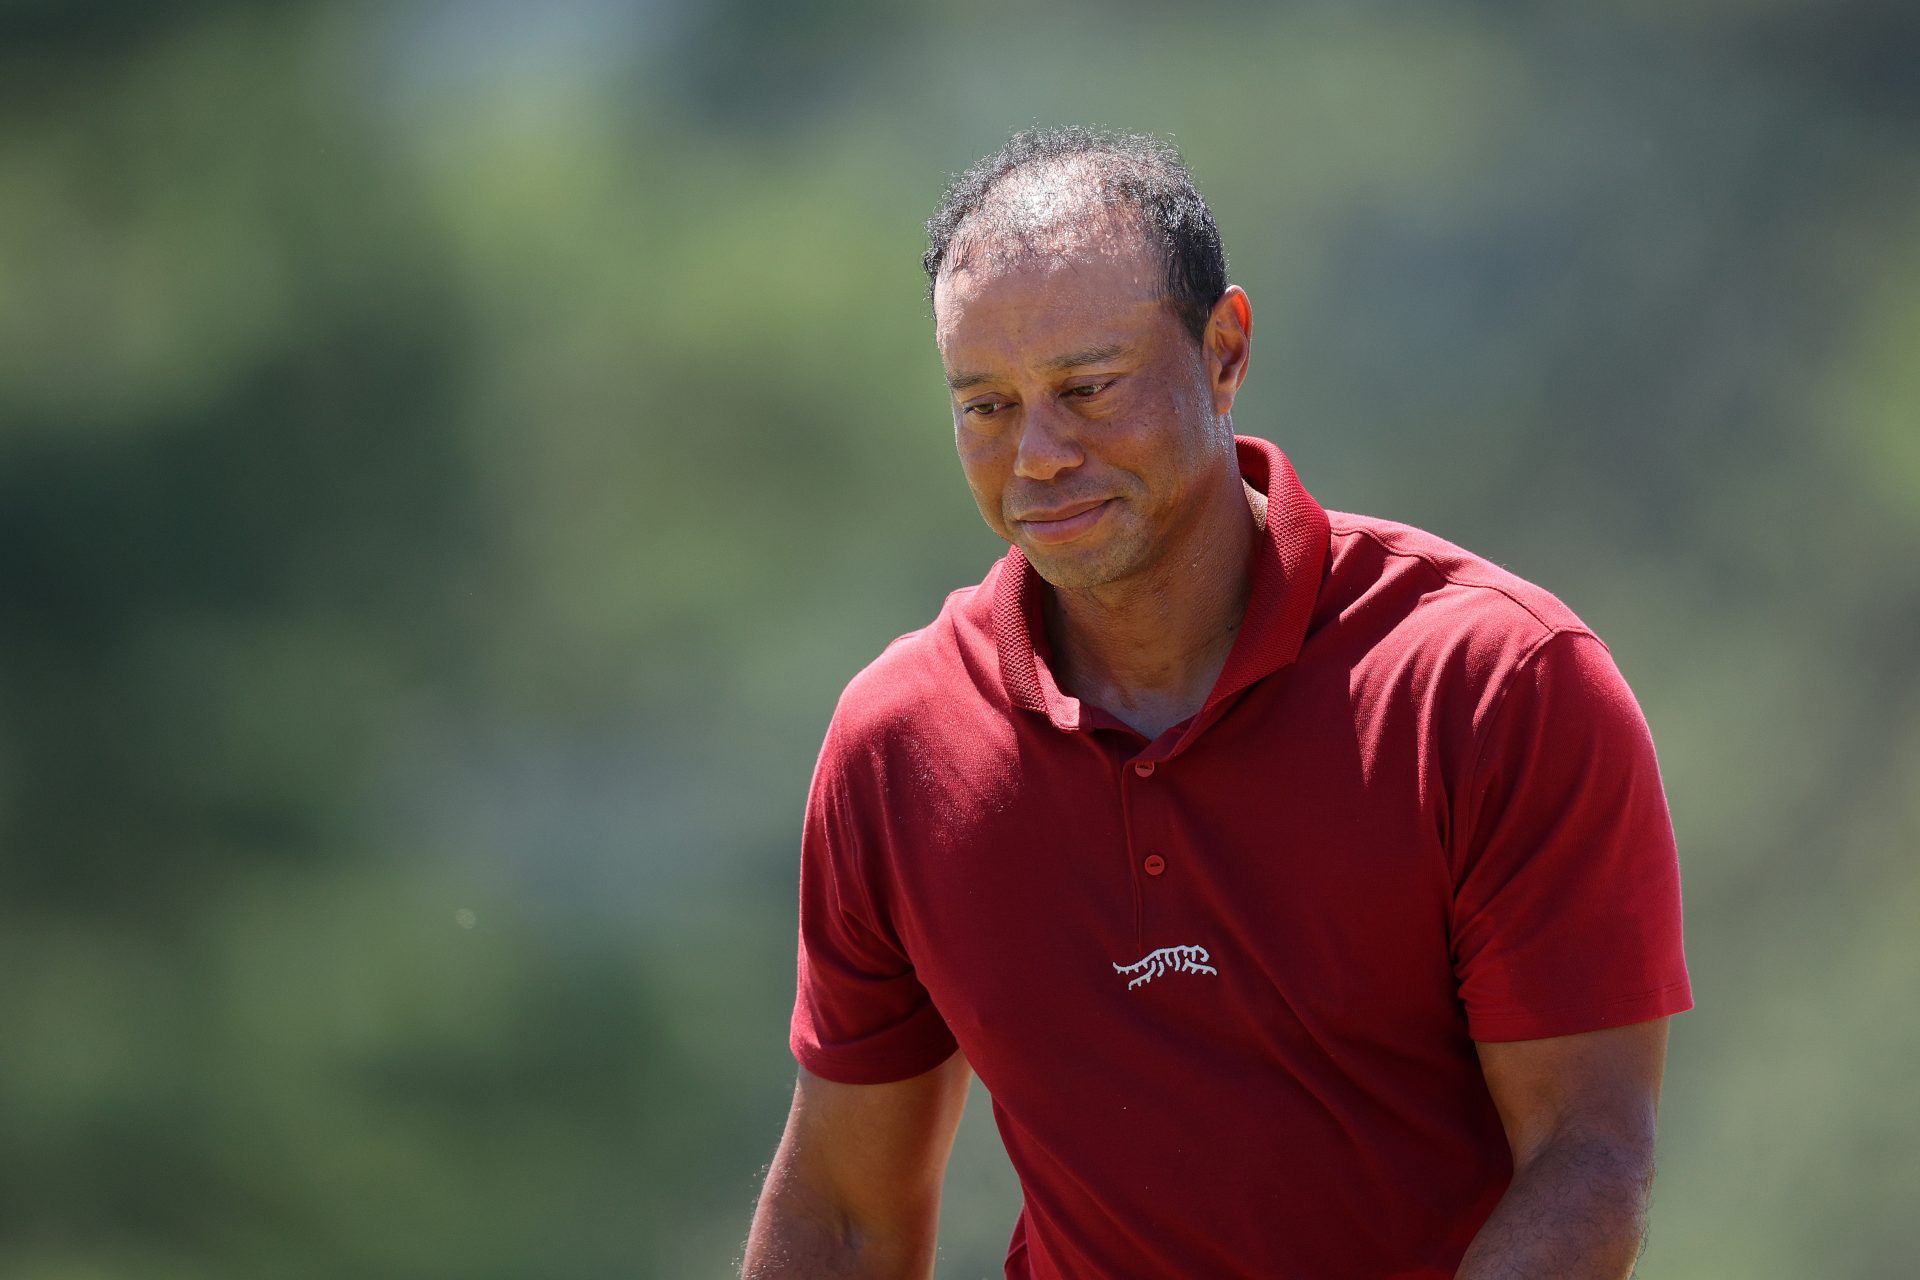 Are Tiger Woods' days as a professional golfer numbered?